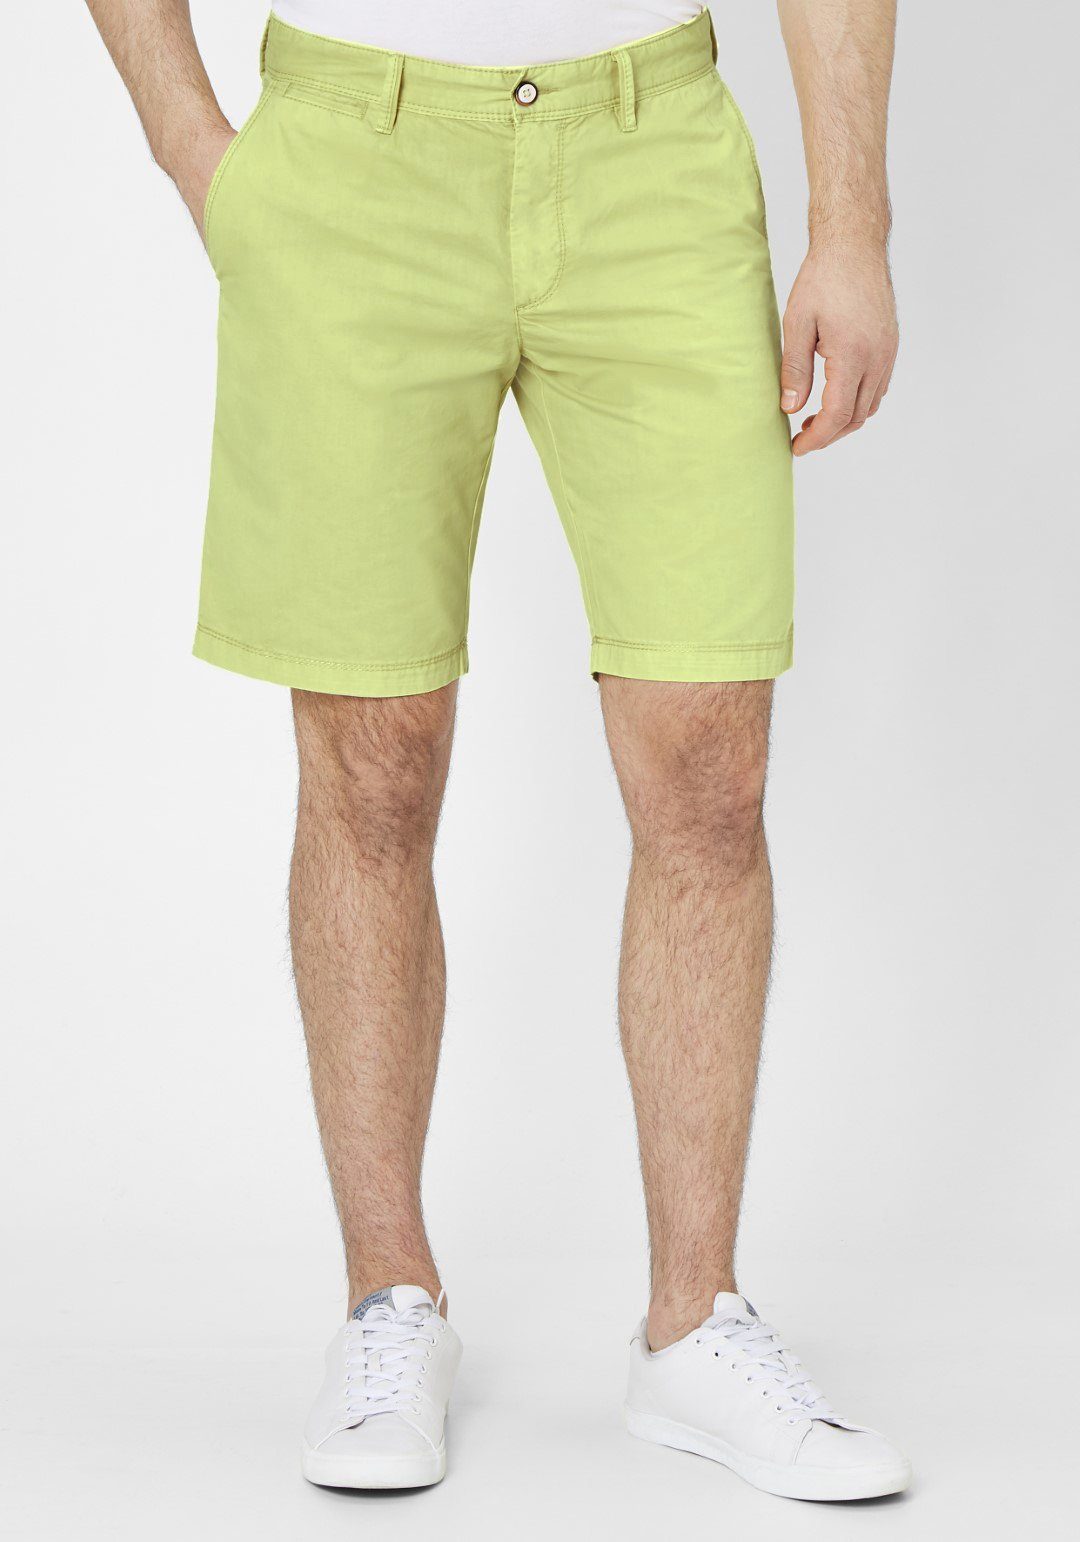 Redpoint Chinoshorts Surray Moderne Chino Bermudas - 16 Shades Edition Lime